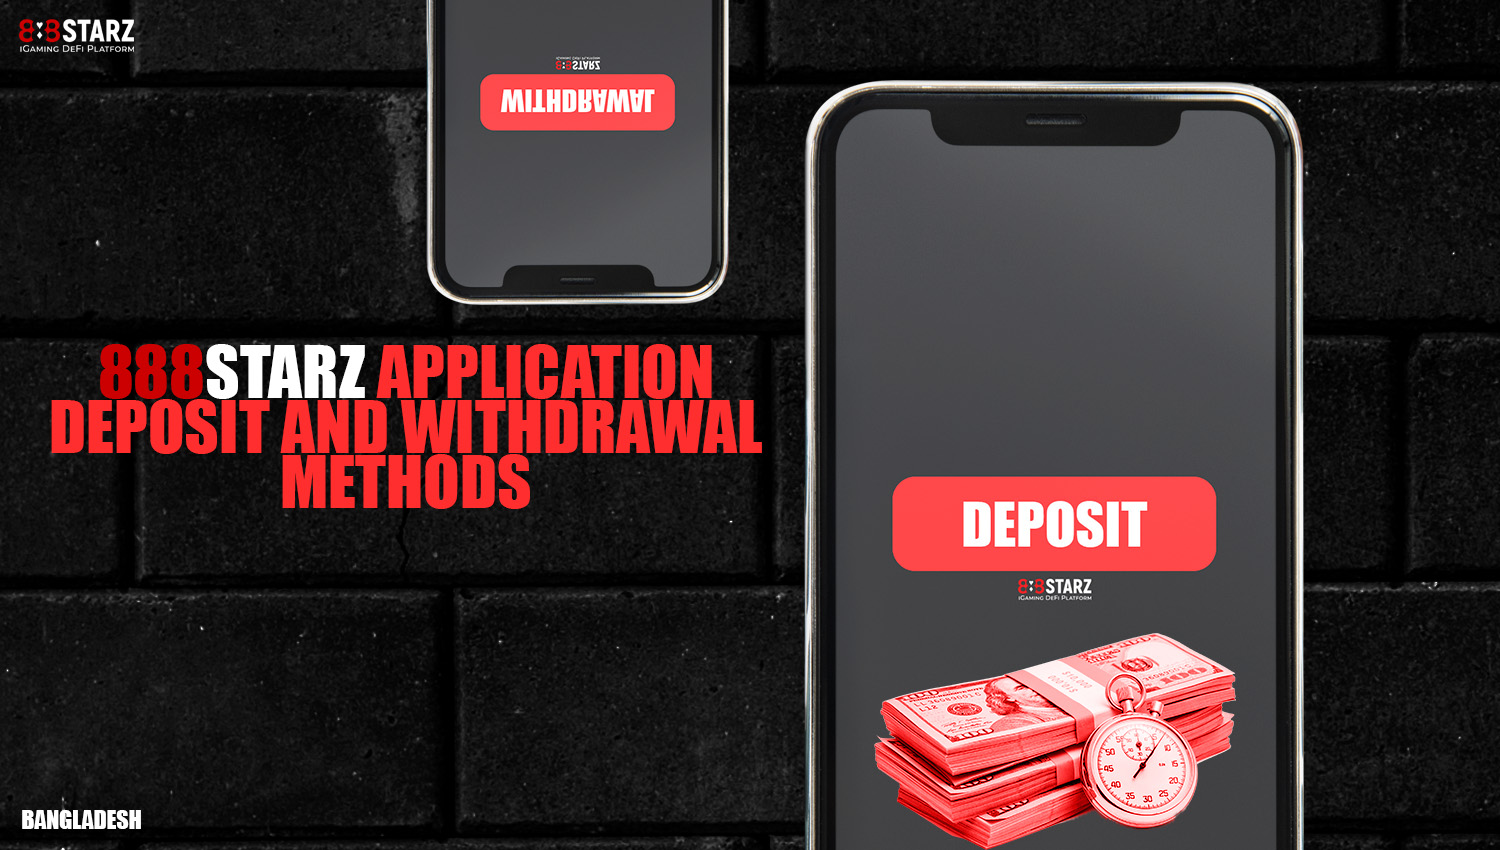 Main ways to deposit and withdraw funds from 888starz